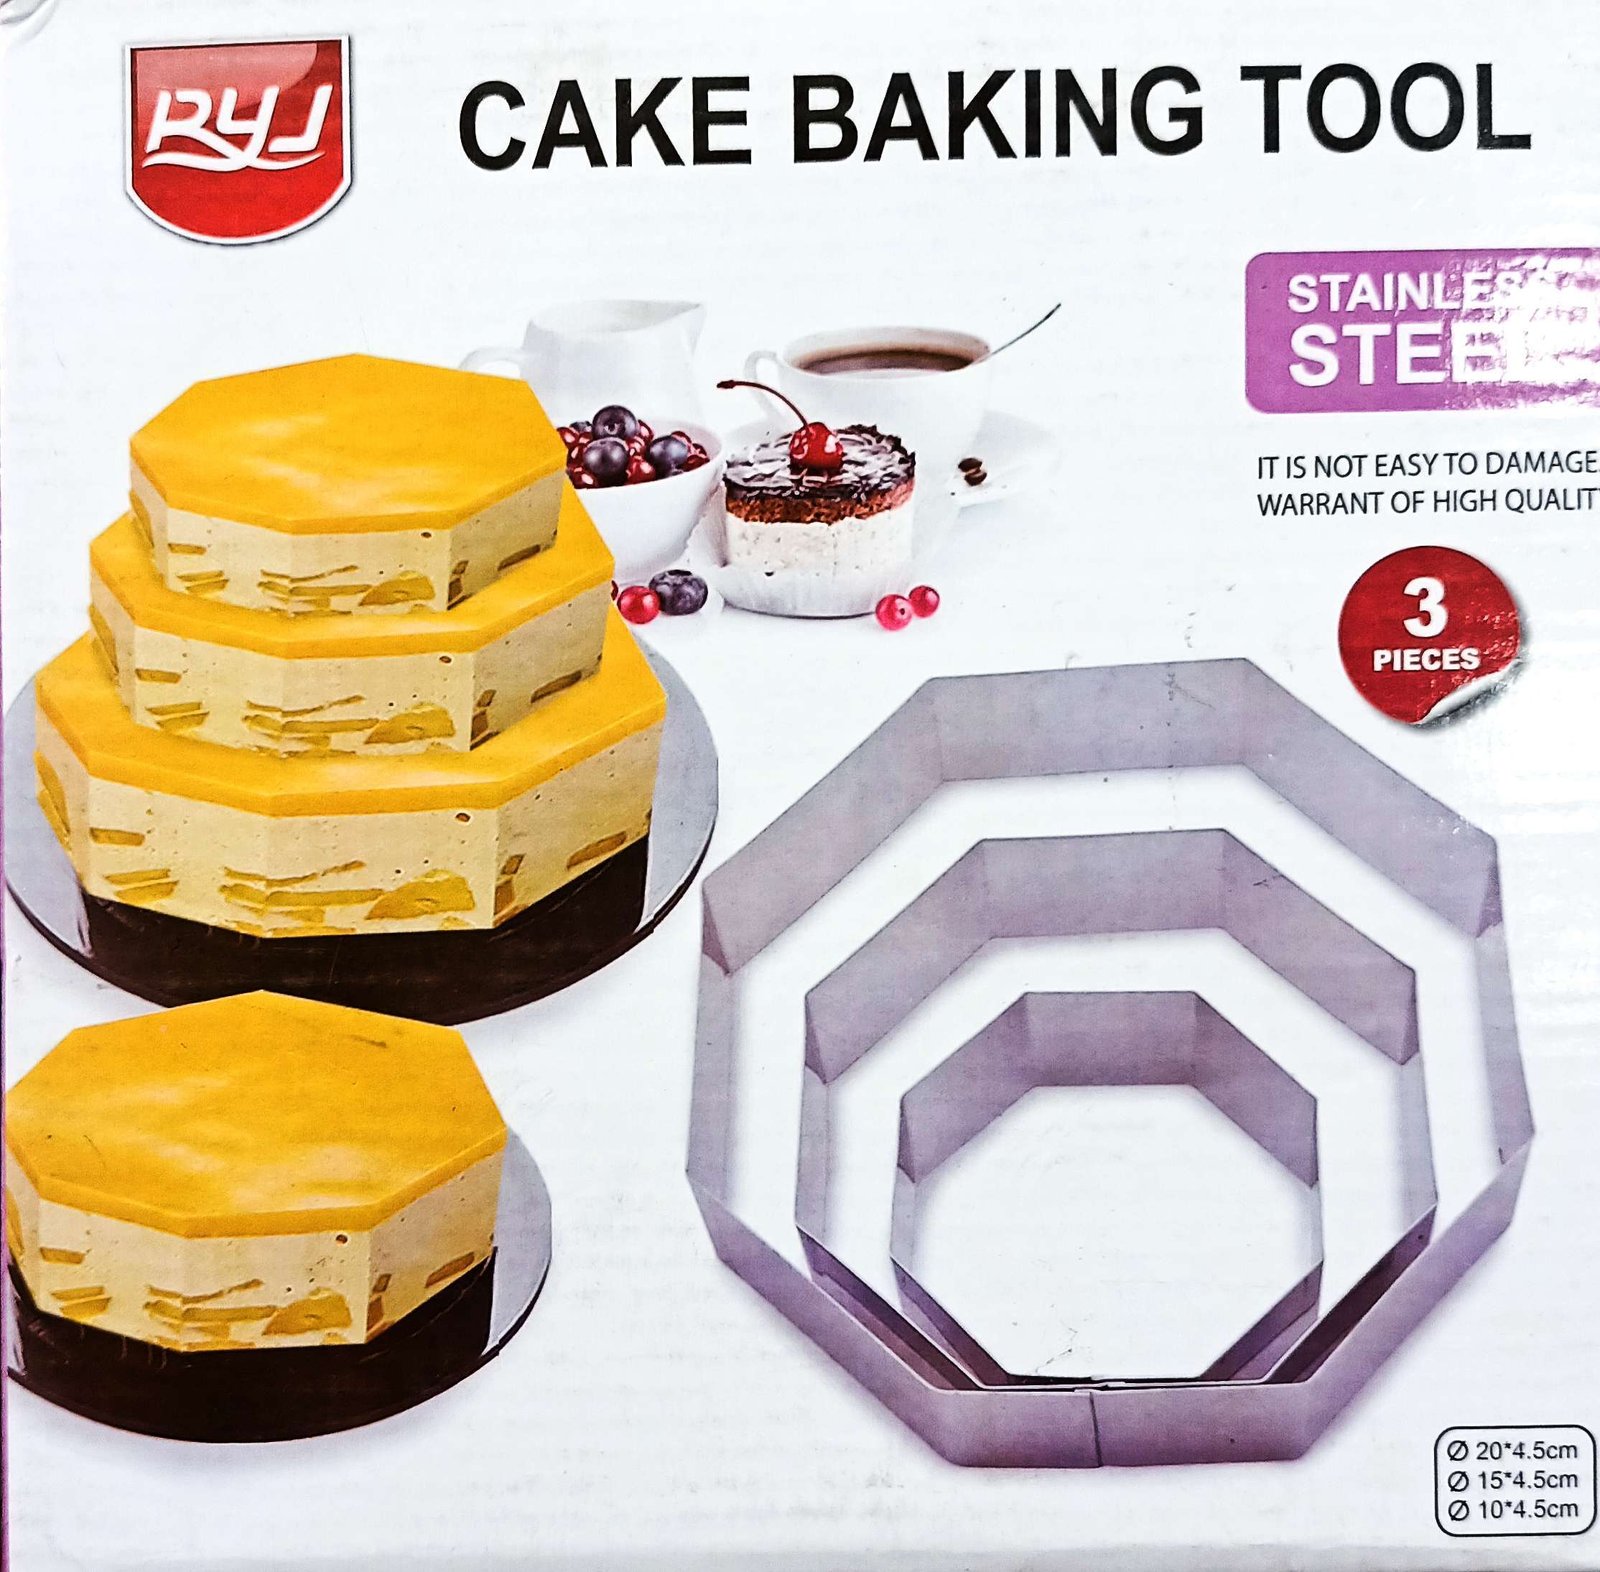 21 Most Essential Cake Baking Equipment You Need to Make Cake – One  Education